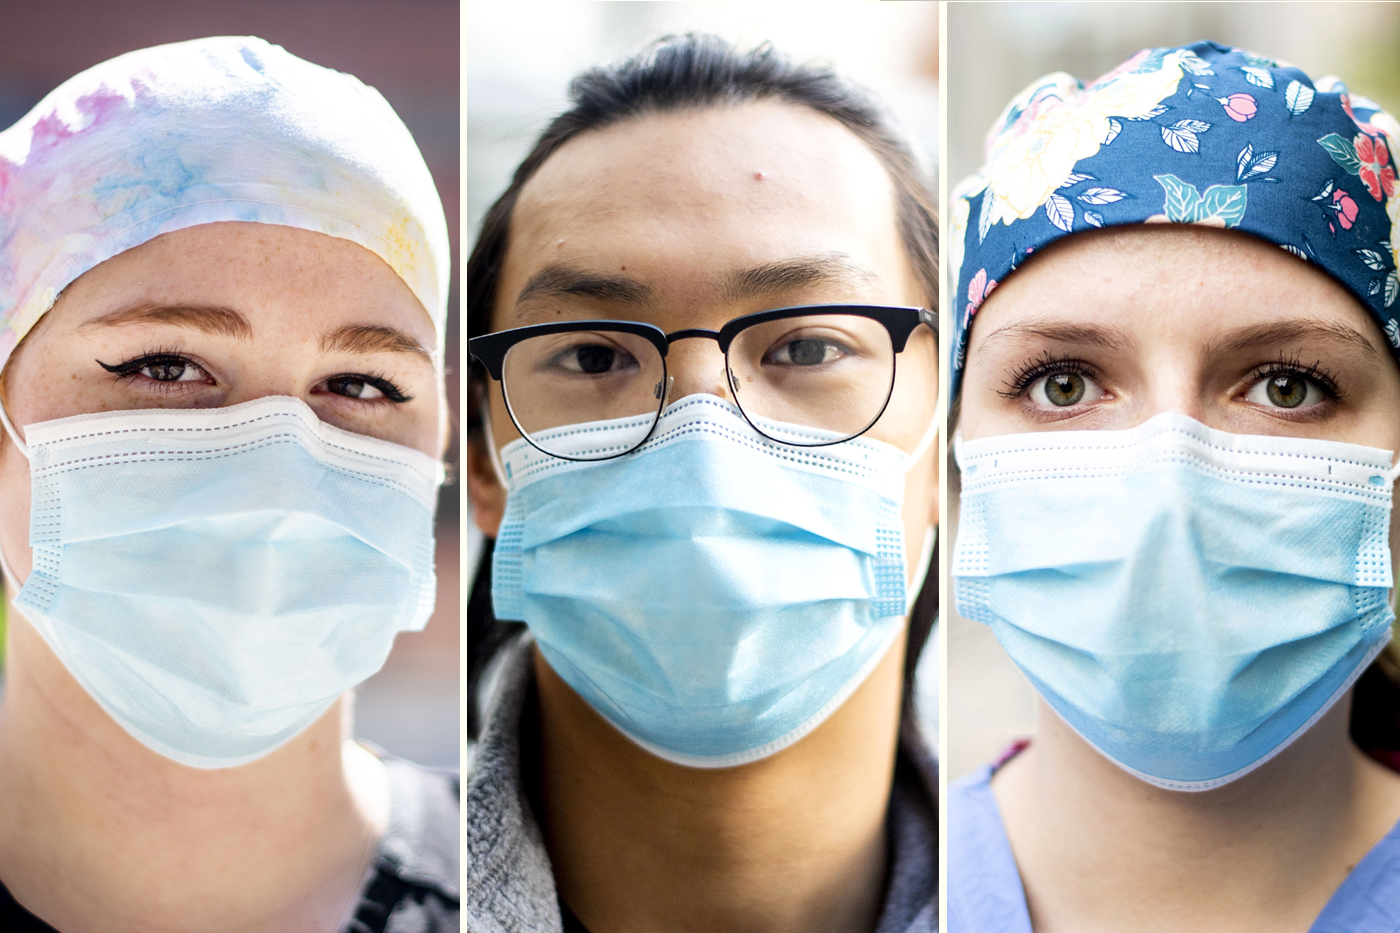 Nursing students are helping to save lives in the COVID-19 outbreak. Here are their stories.